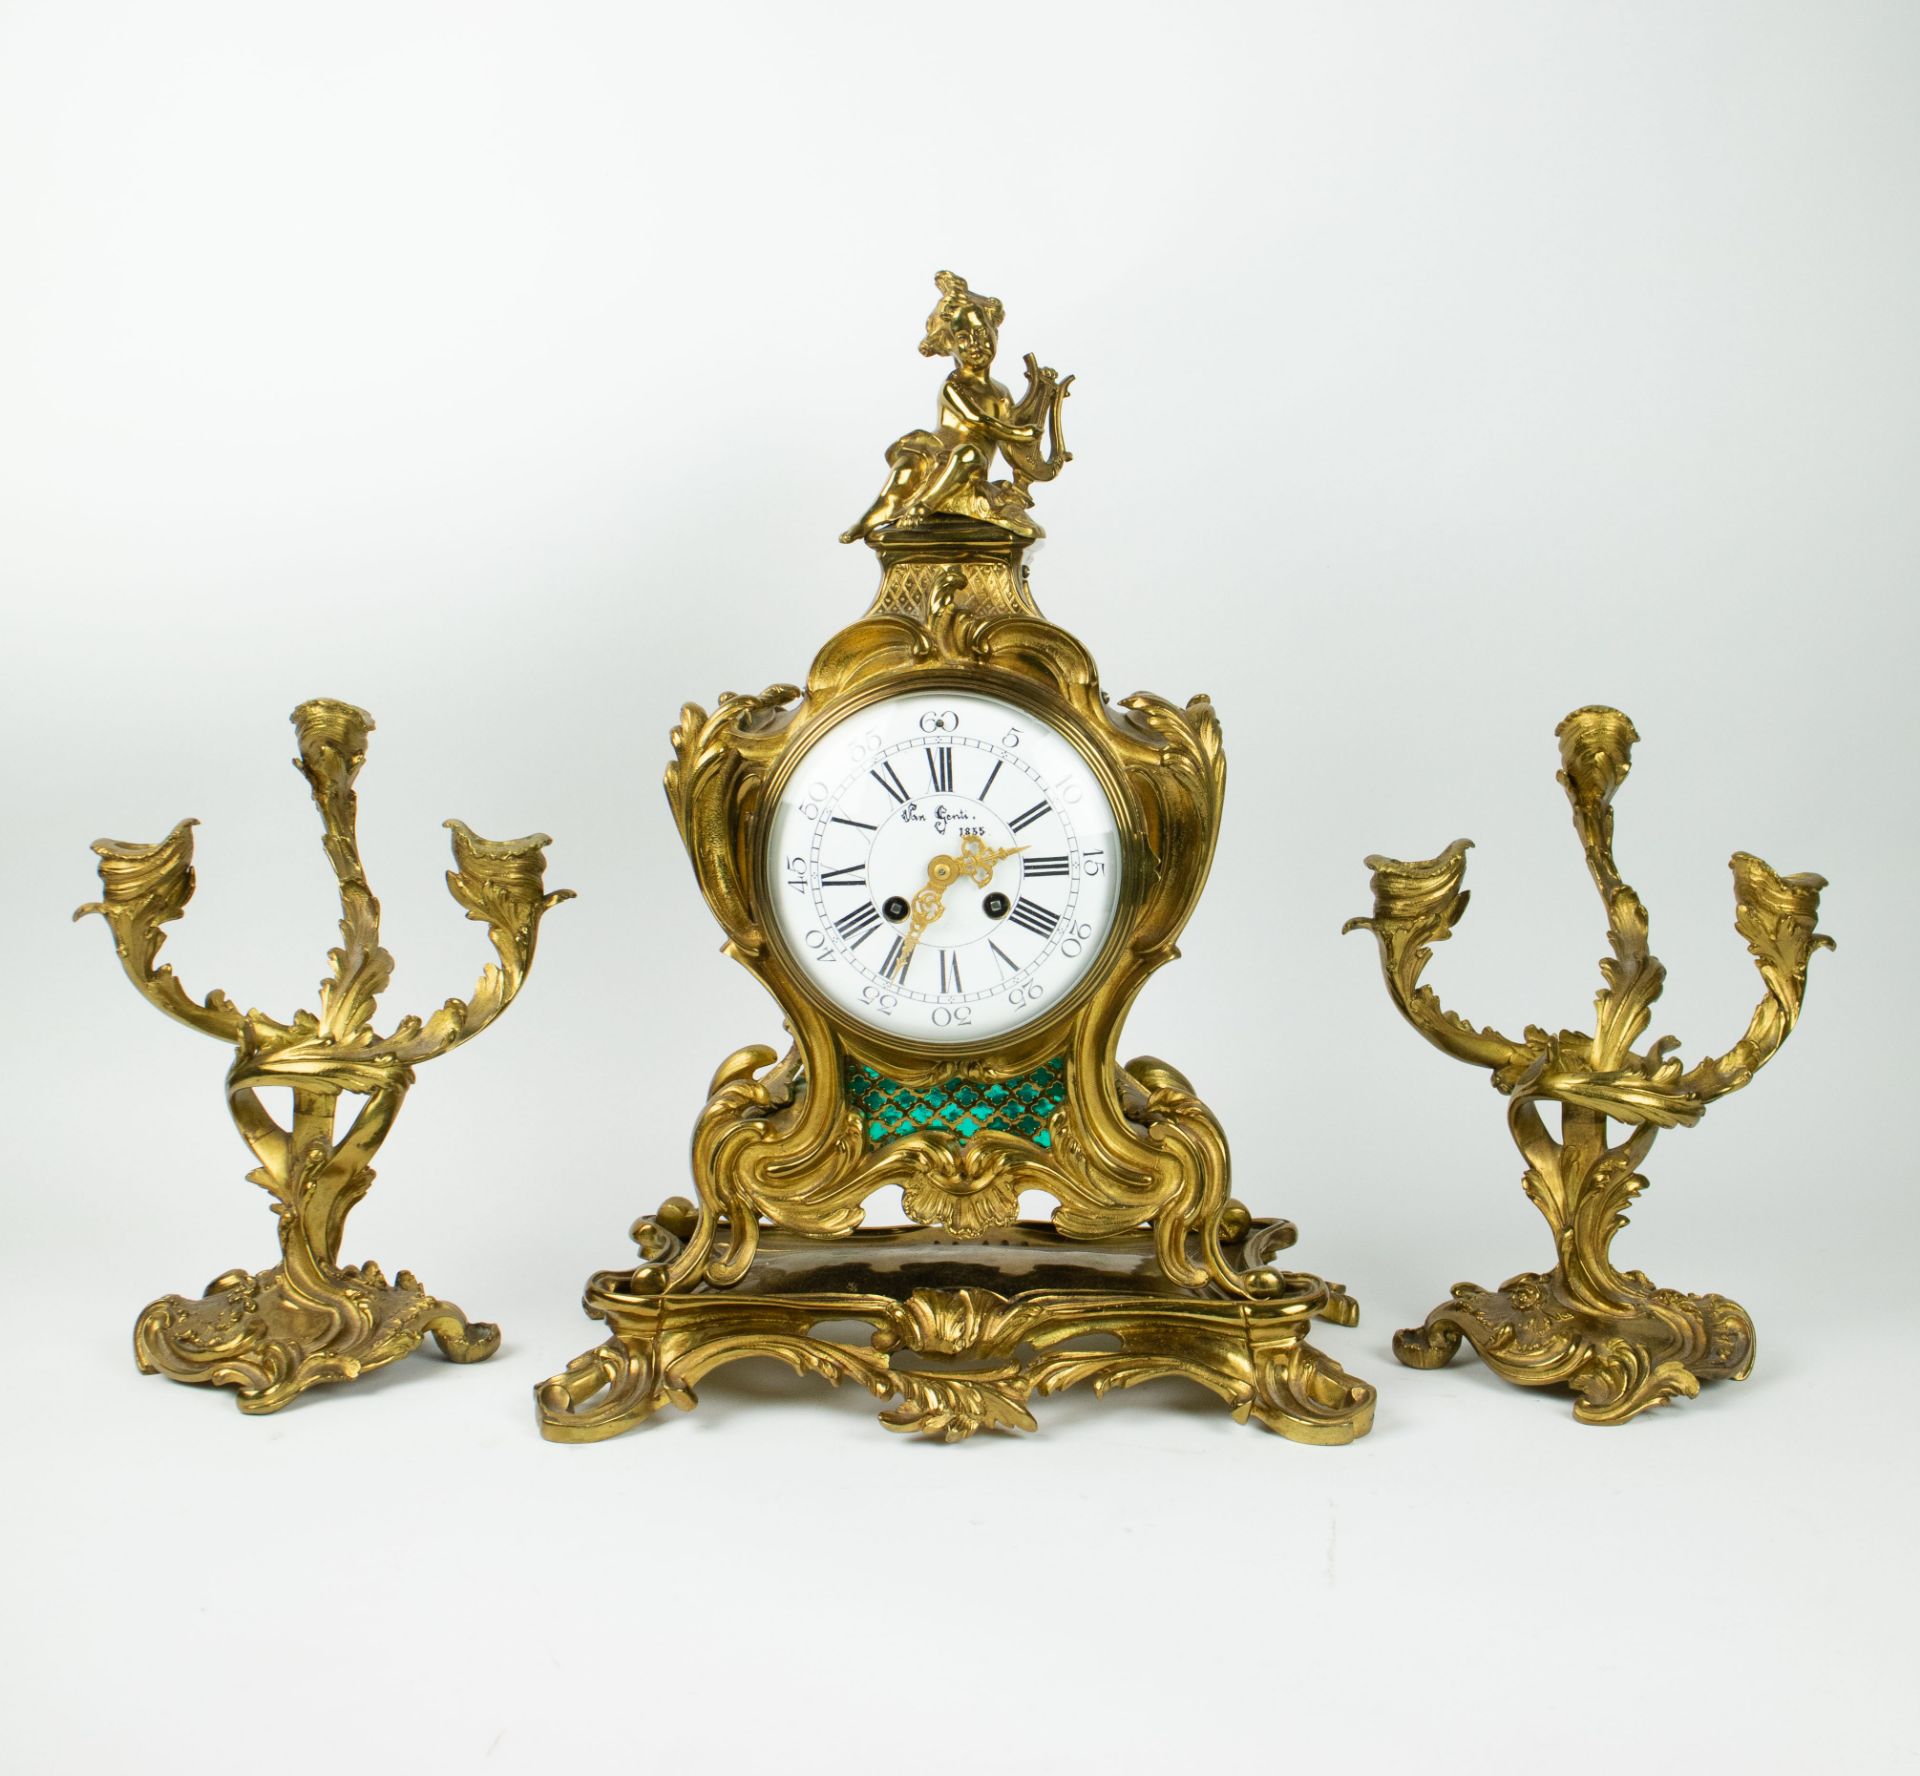 Pendulum and 2 candlesticks in bronze doré, signed in the dial Van Gent 1855